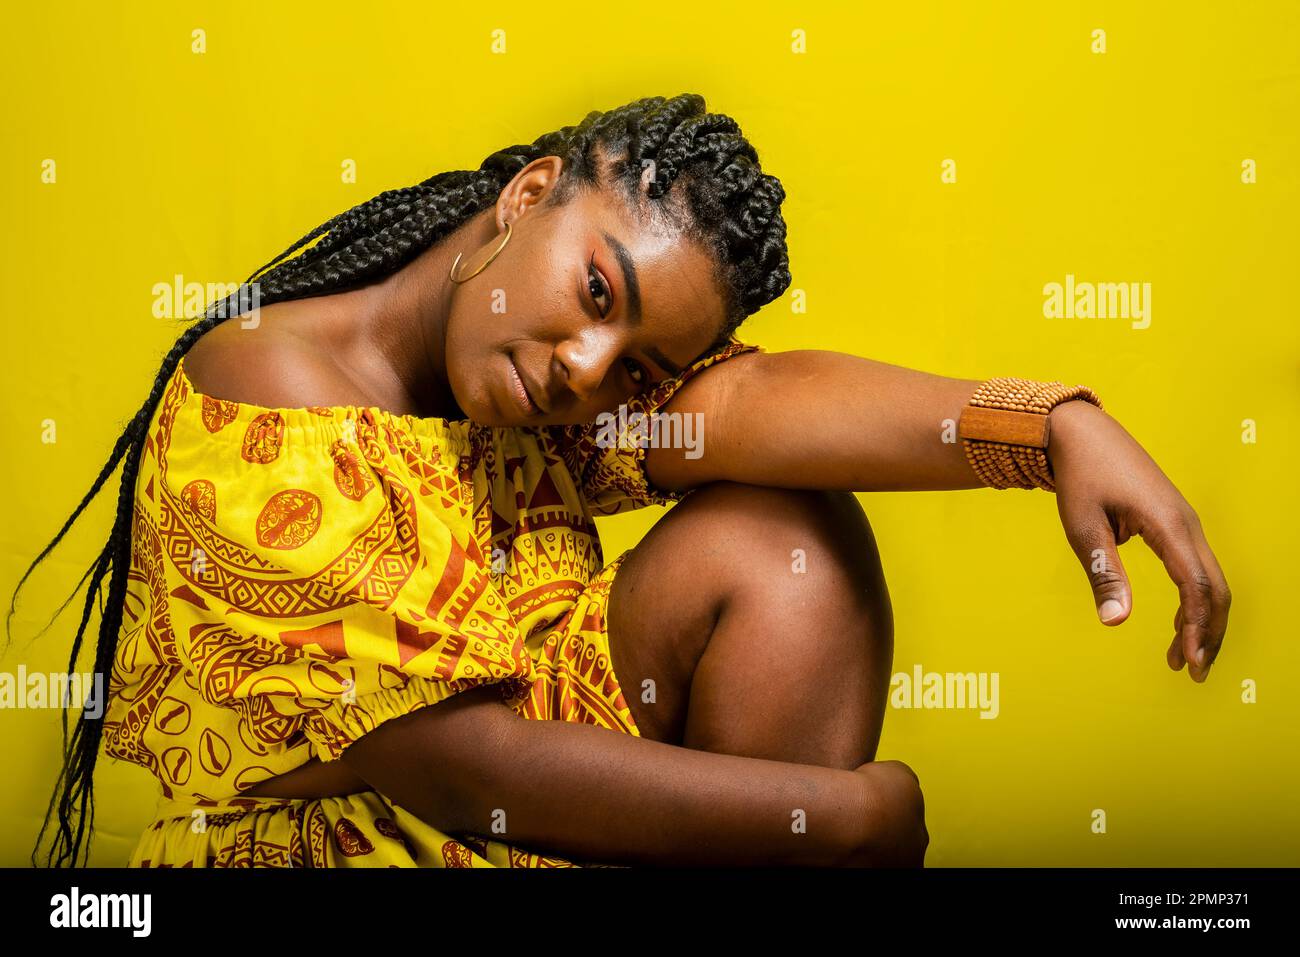 Portrait of a beautiful woman, seated, with her head lowered on her arm. Isolated on yellow background. Stock Photo